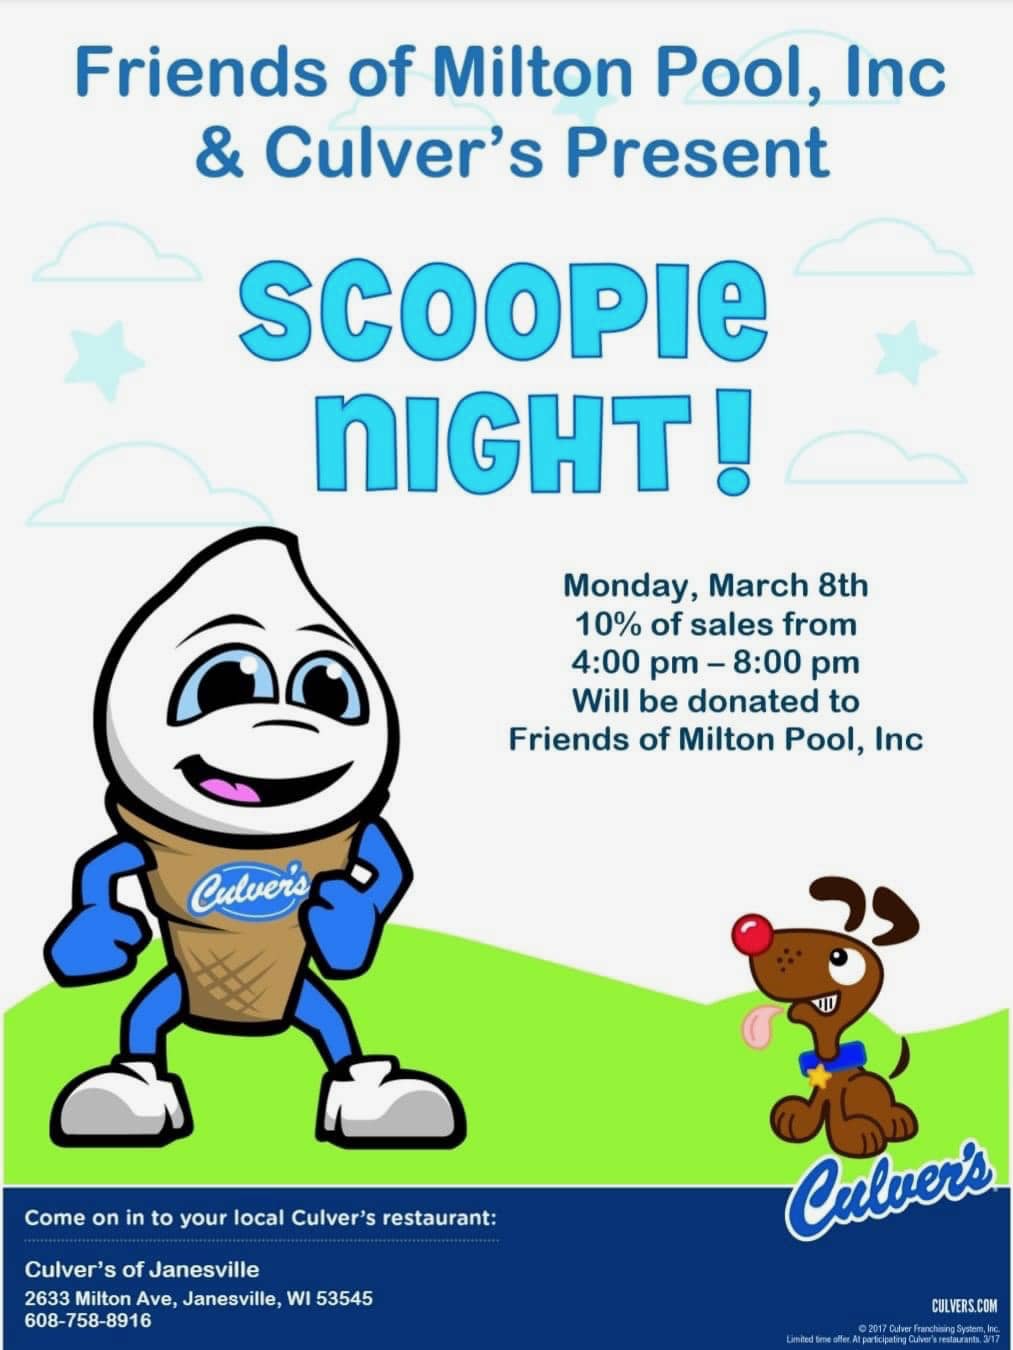 Culver’s Scoopie Night benefiting the new Lieder Family Pool in Milton